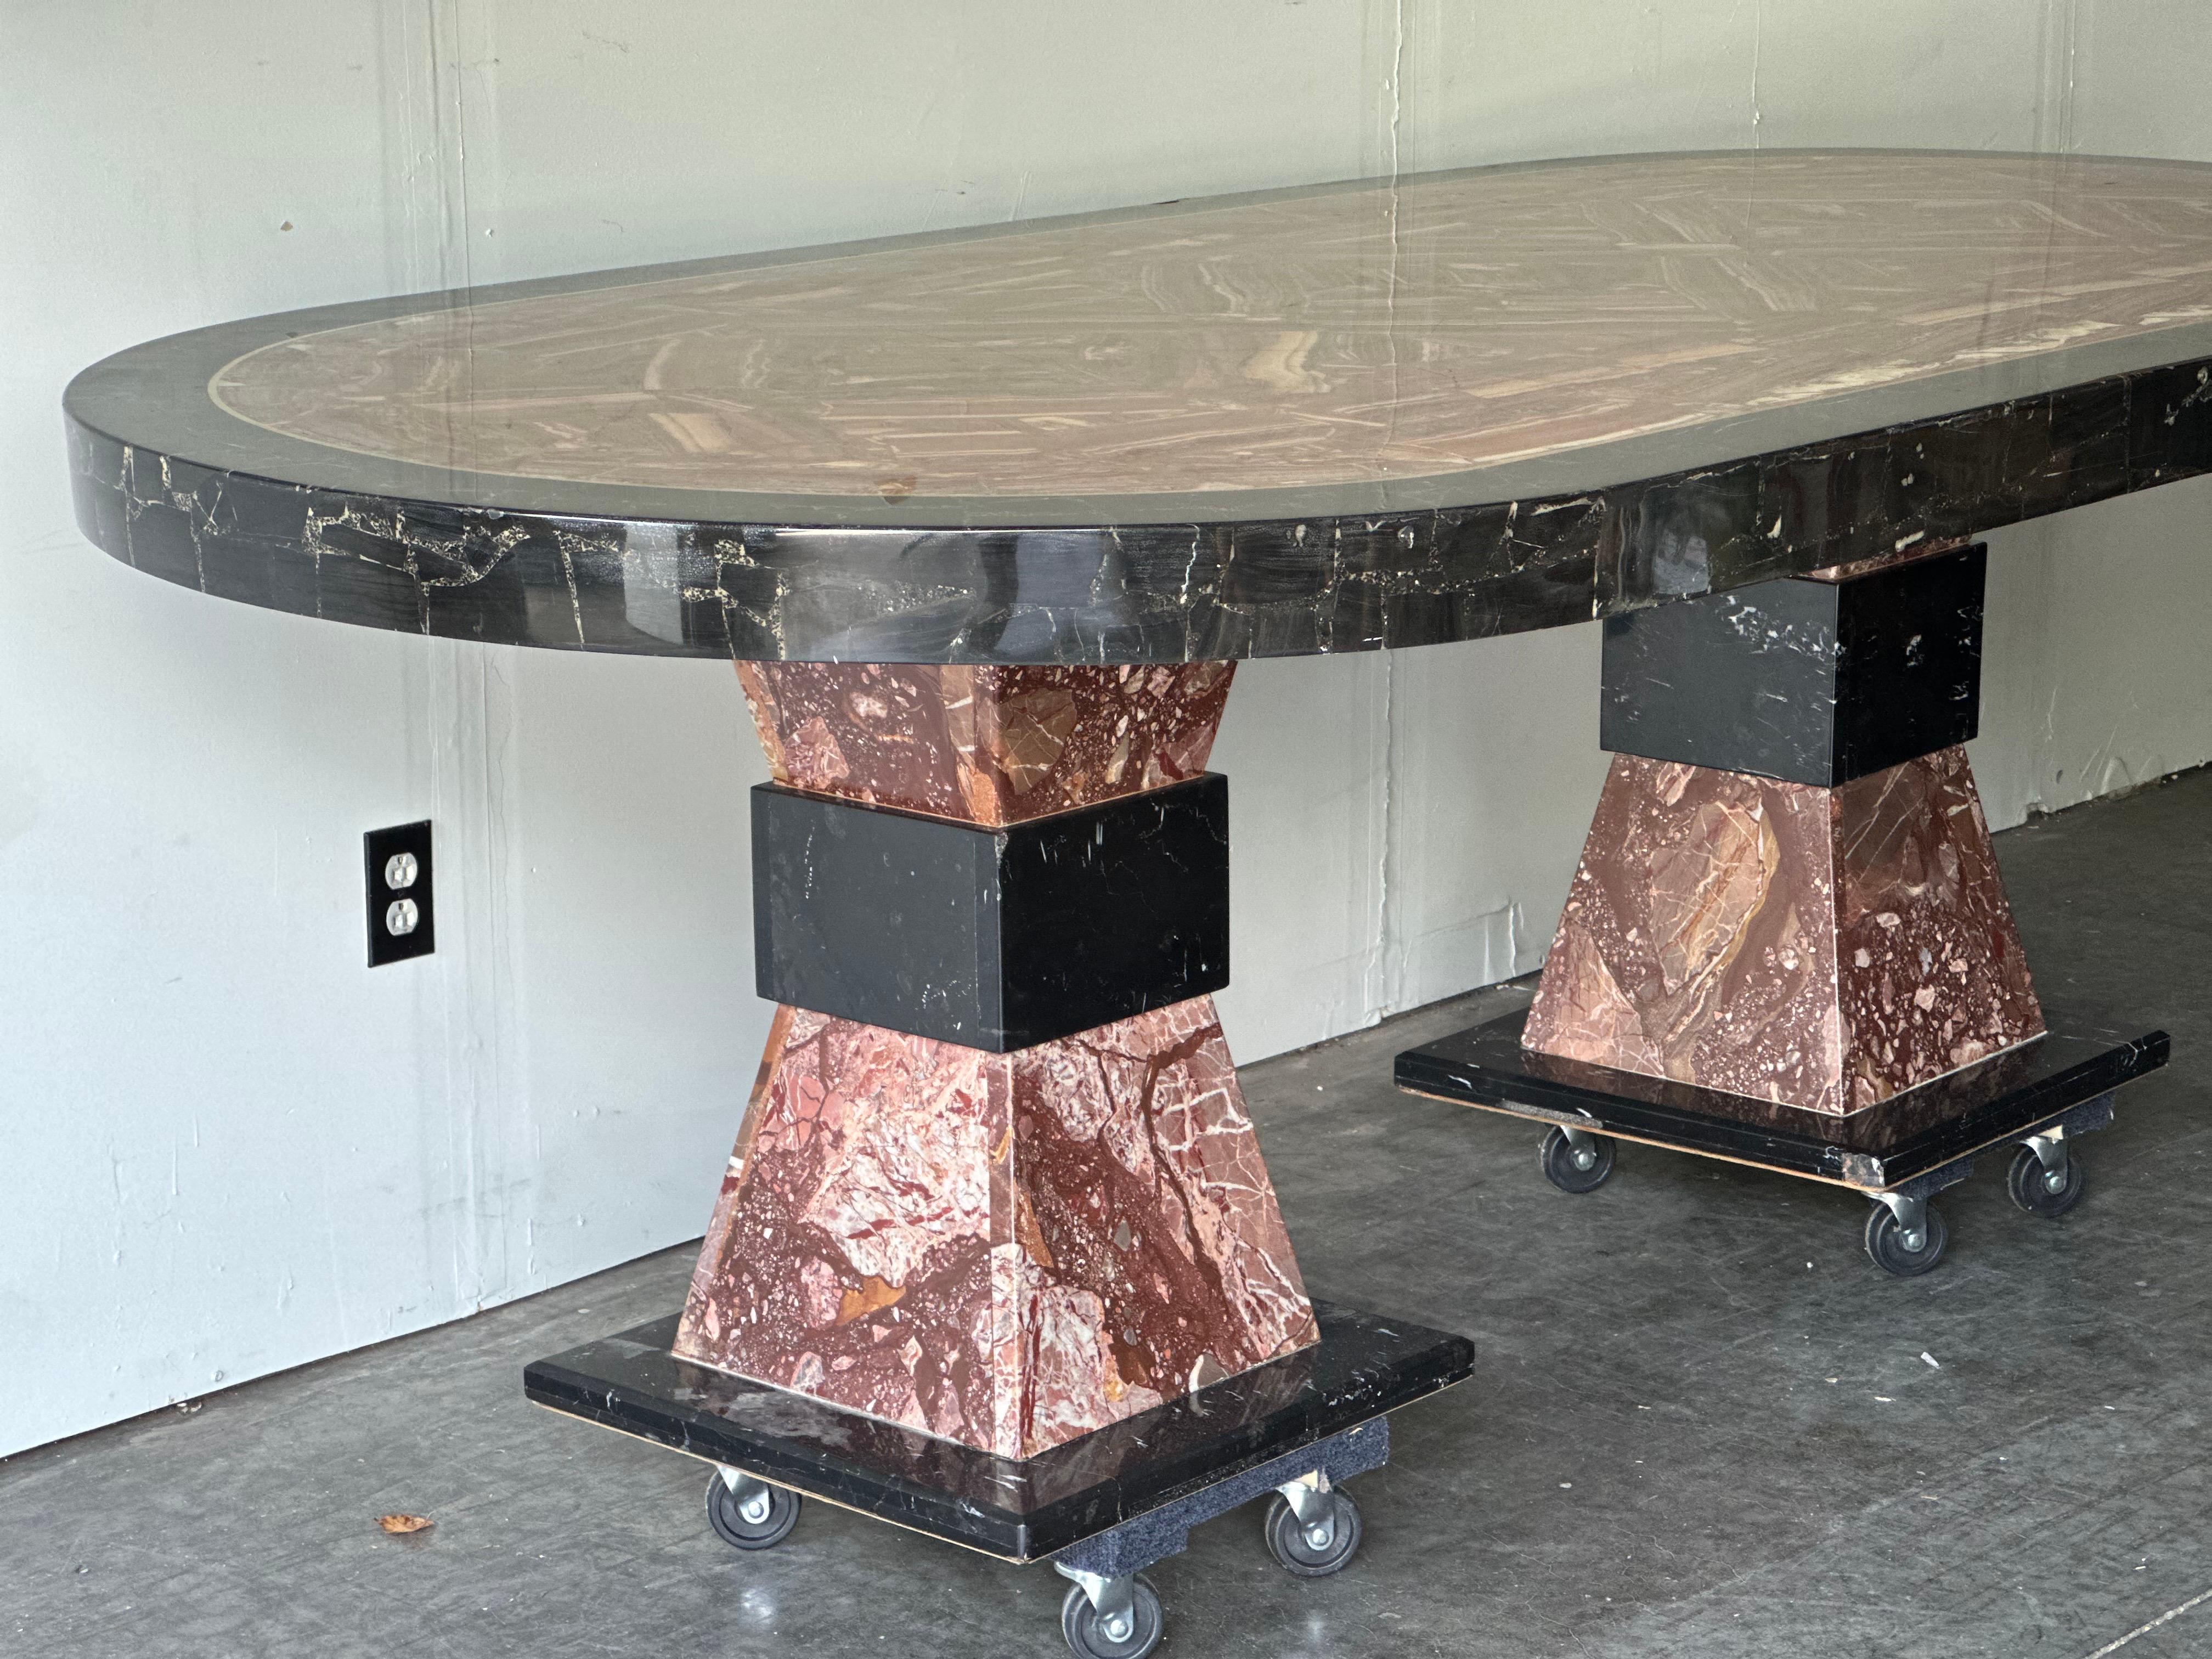 Oval onyx and marble dining table by Muller of Mexico. Large table top rests of two stone base pieces. Epoxy finish on table top has slight chips as shown in photos. Can be removed or repaired by is fine as-is. Table is displayed on flat dollies in